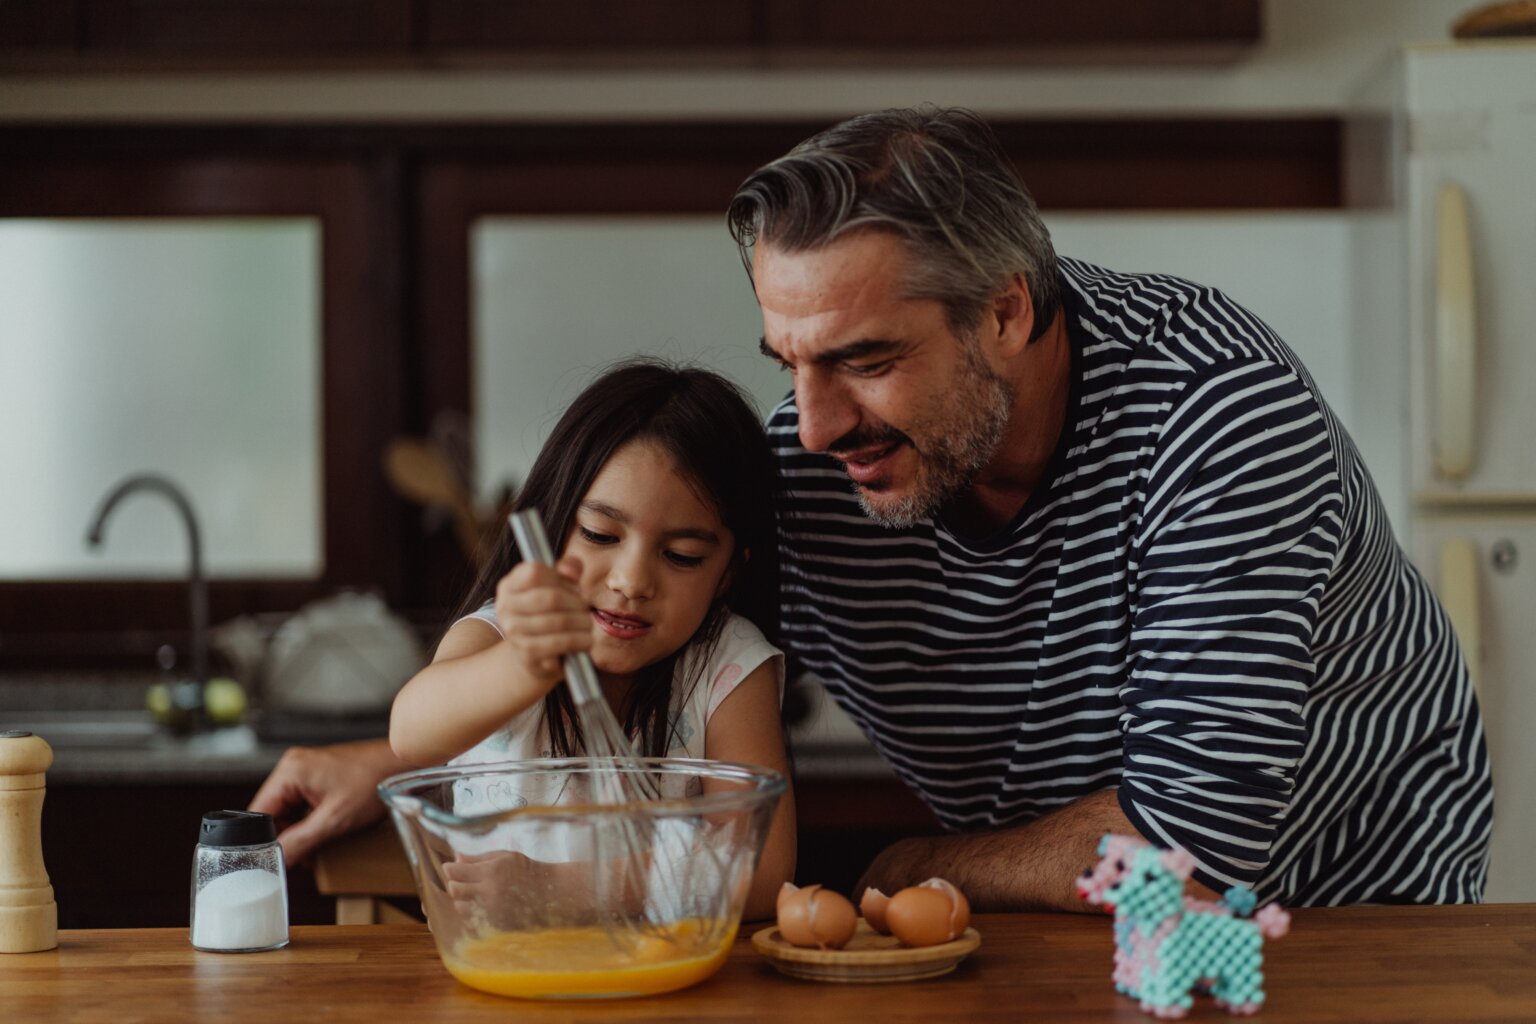 A dad helping his daughter whisk eggs.